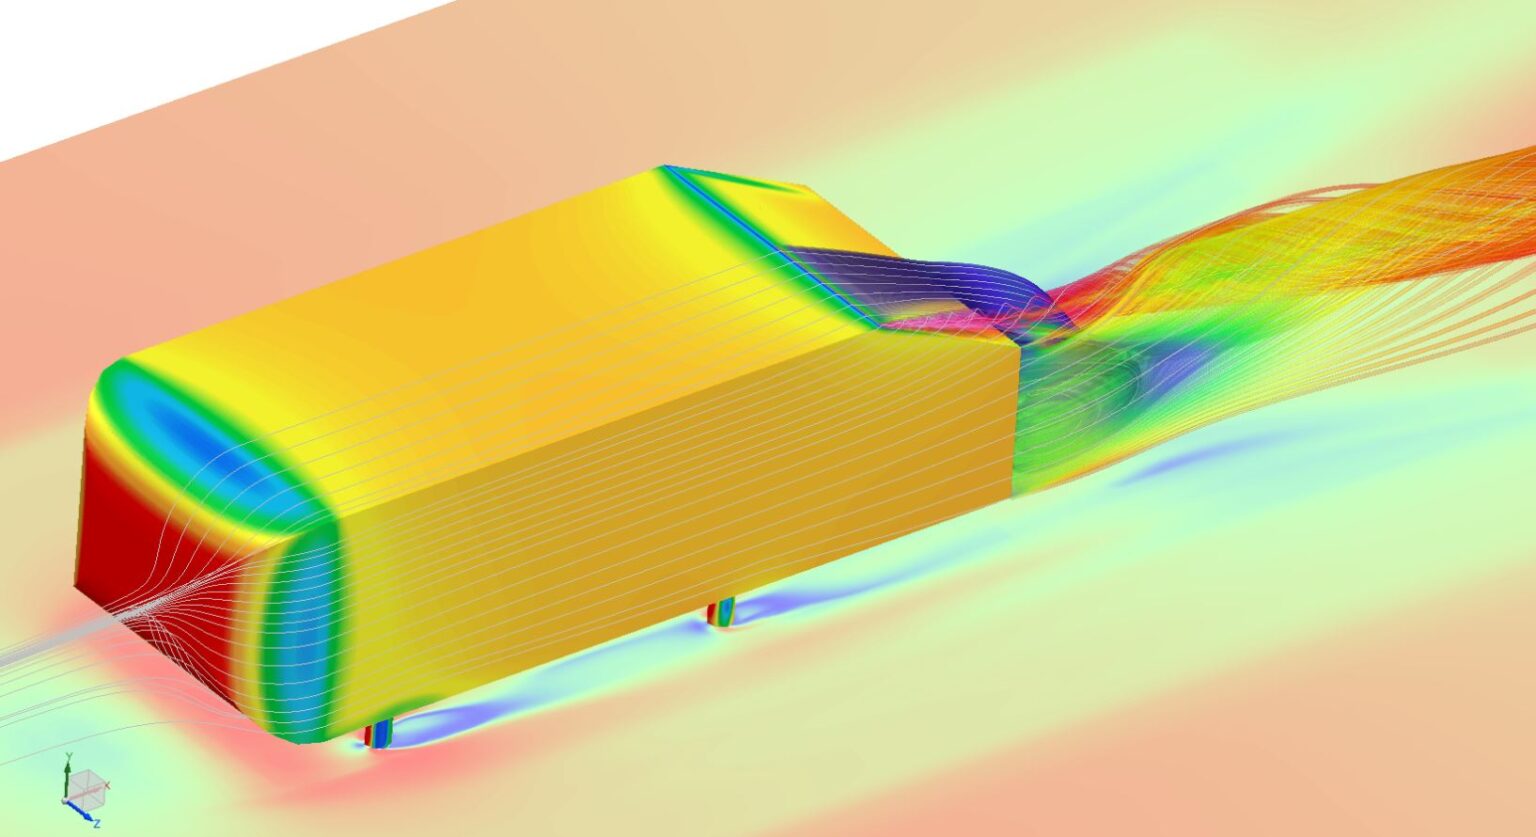 Turbulence models in automotive aerodynamics - which is the best?